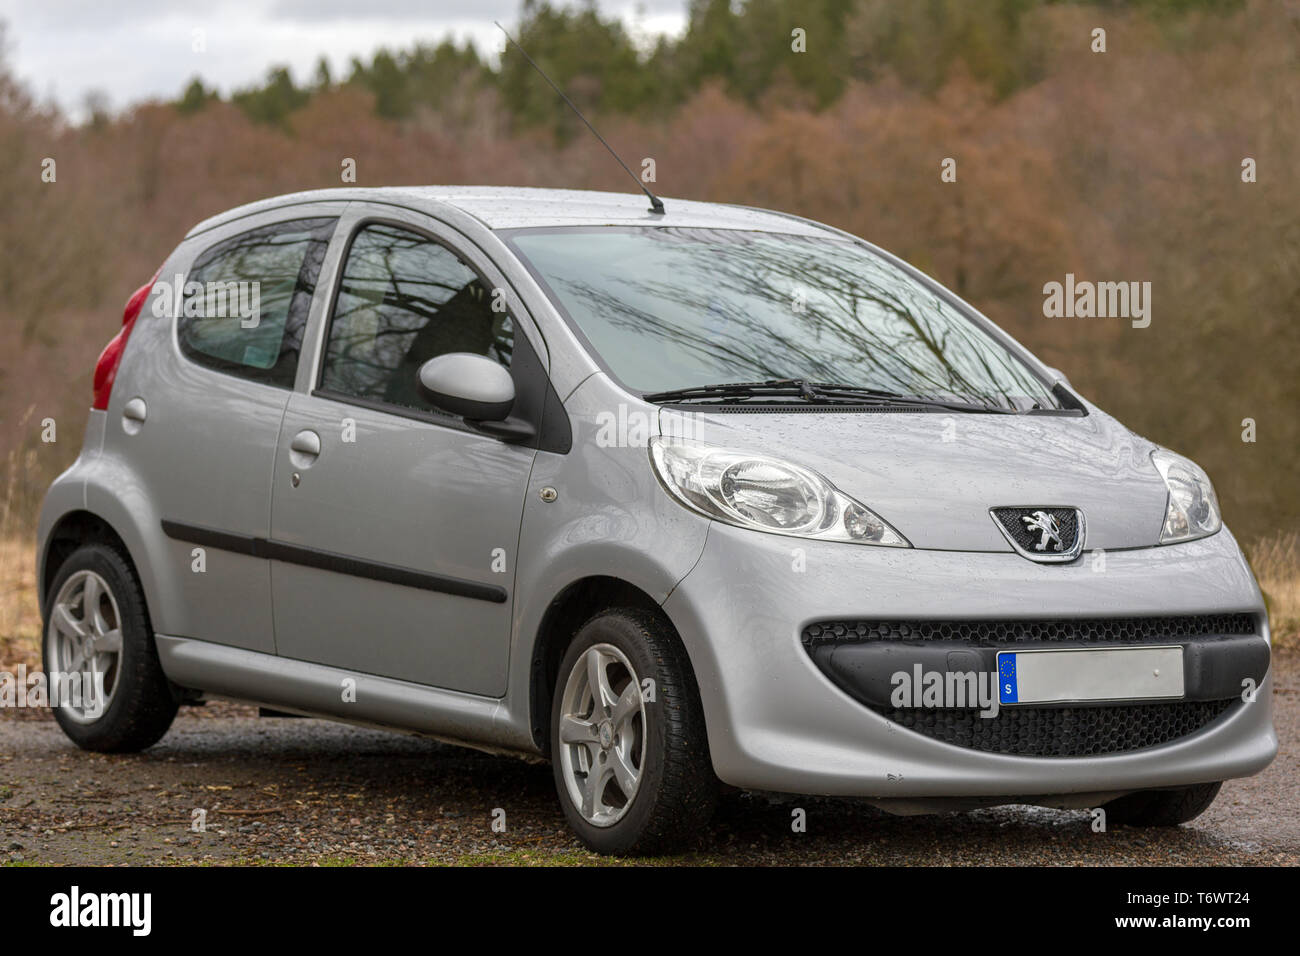 Silver Peugeot 107 city car in countryside setting Stock Photo - Alamy